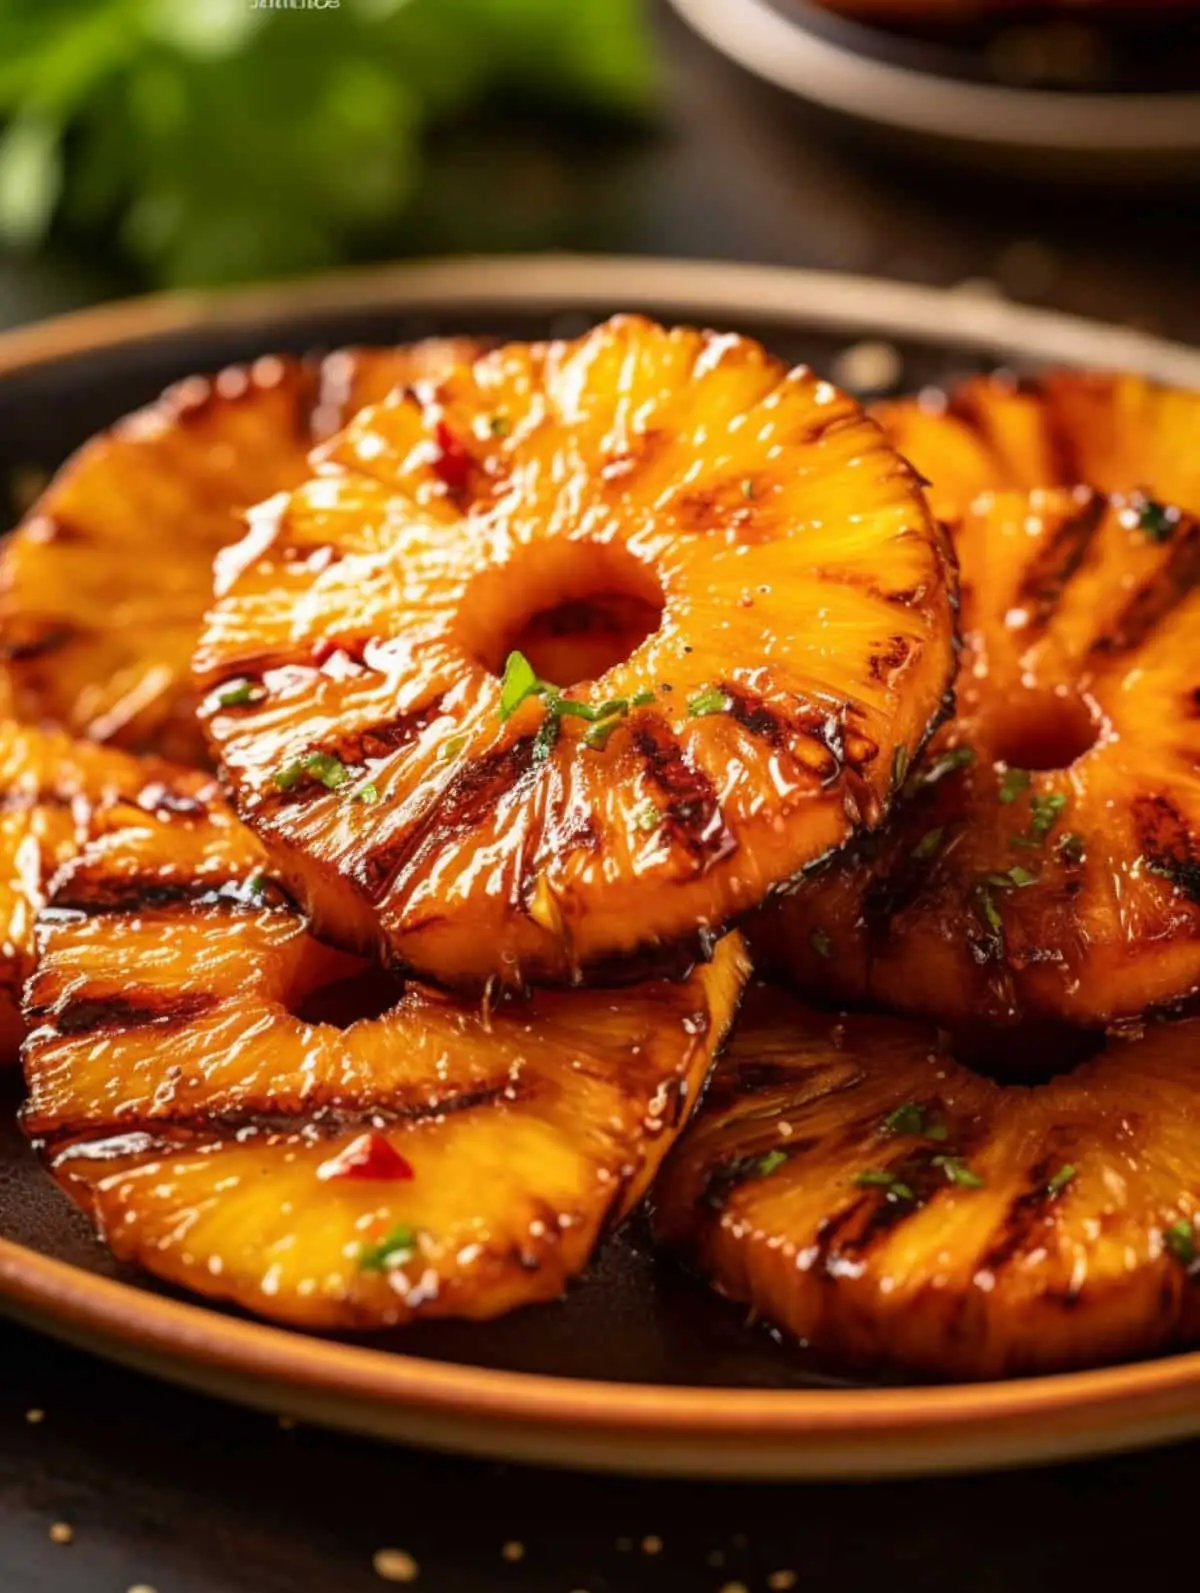 A plate of grilled pineapple.